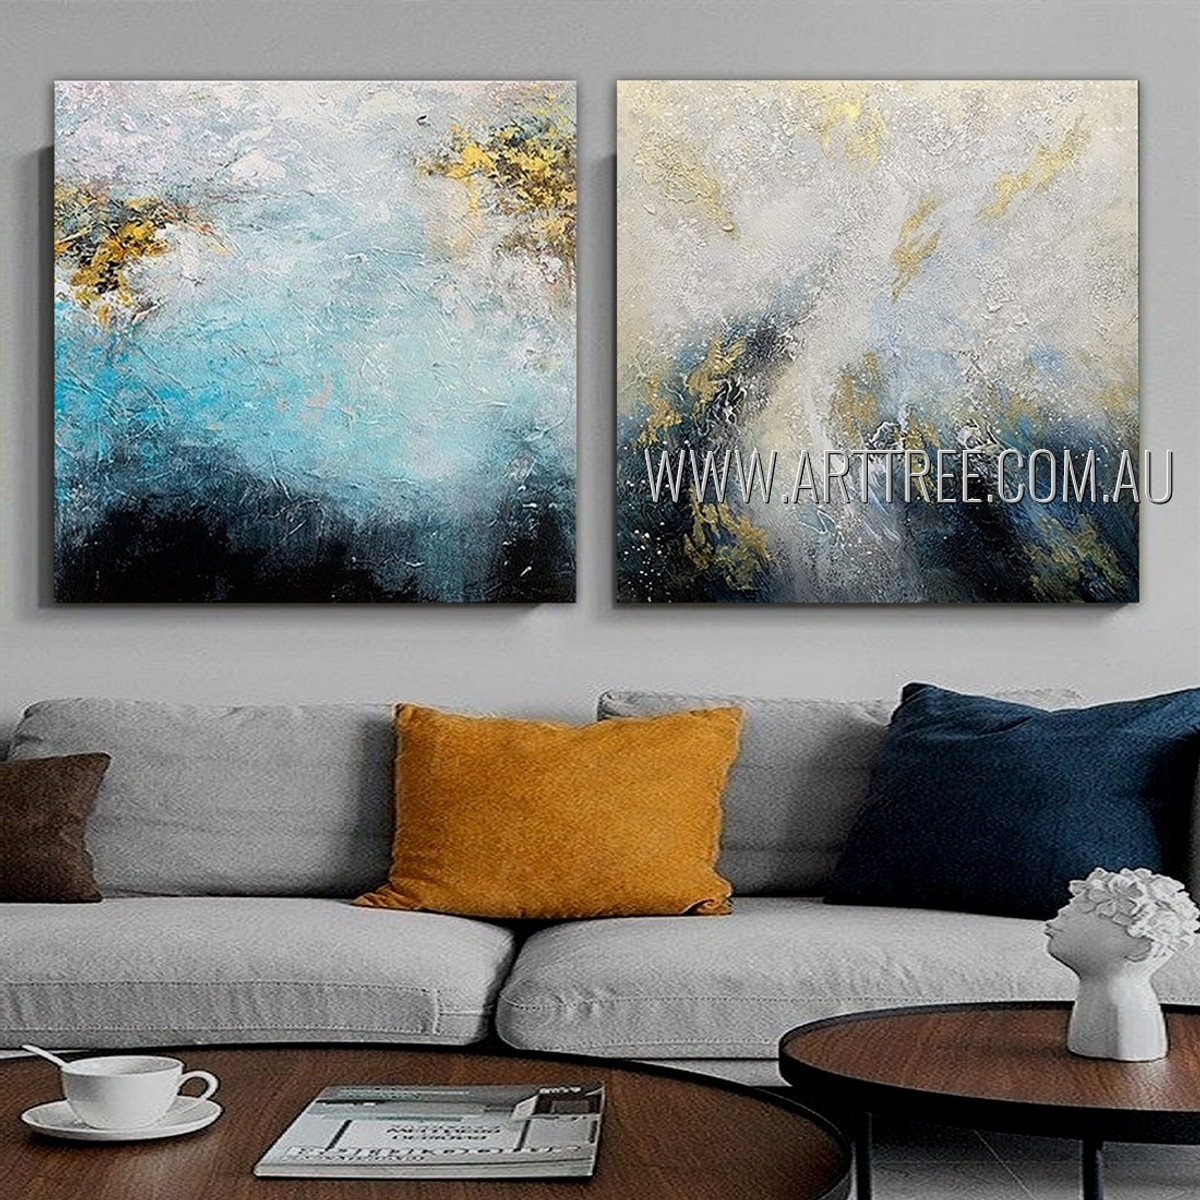 Calico Smudges Abstract Modern Heavy Texture 2 Piece Multi Panel Canvas Oil Painting Wall Art Set For Room Embellishment